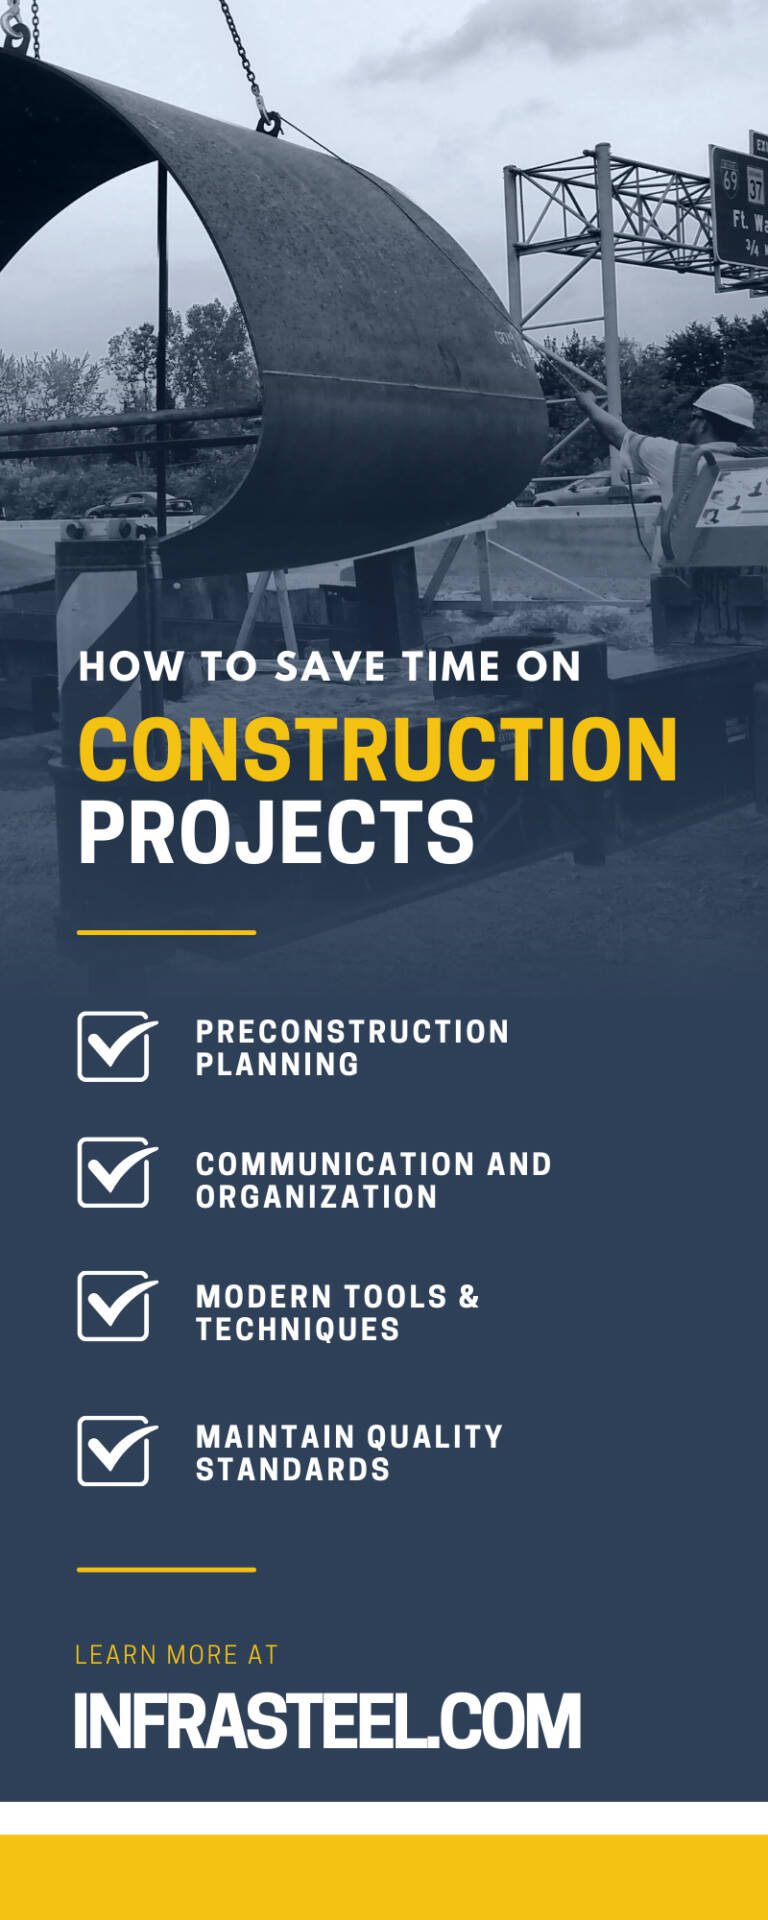 How To Save Time on Construction Projects